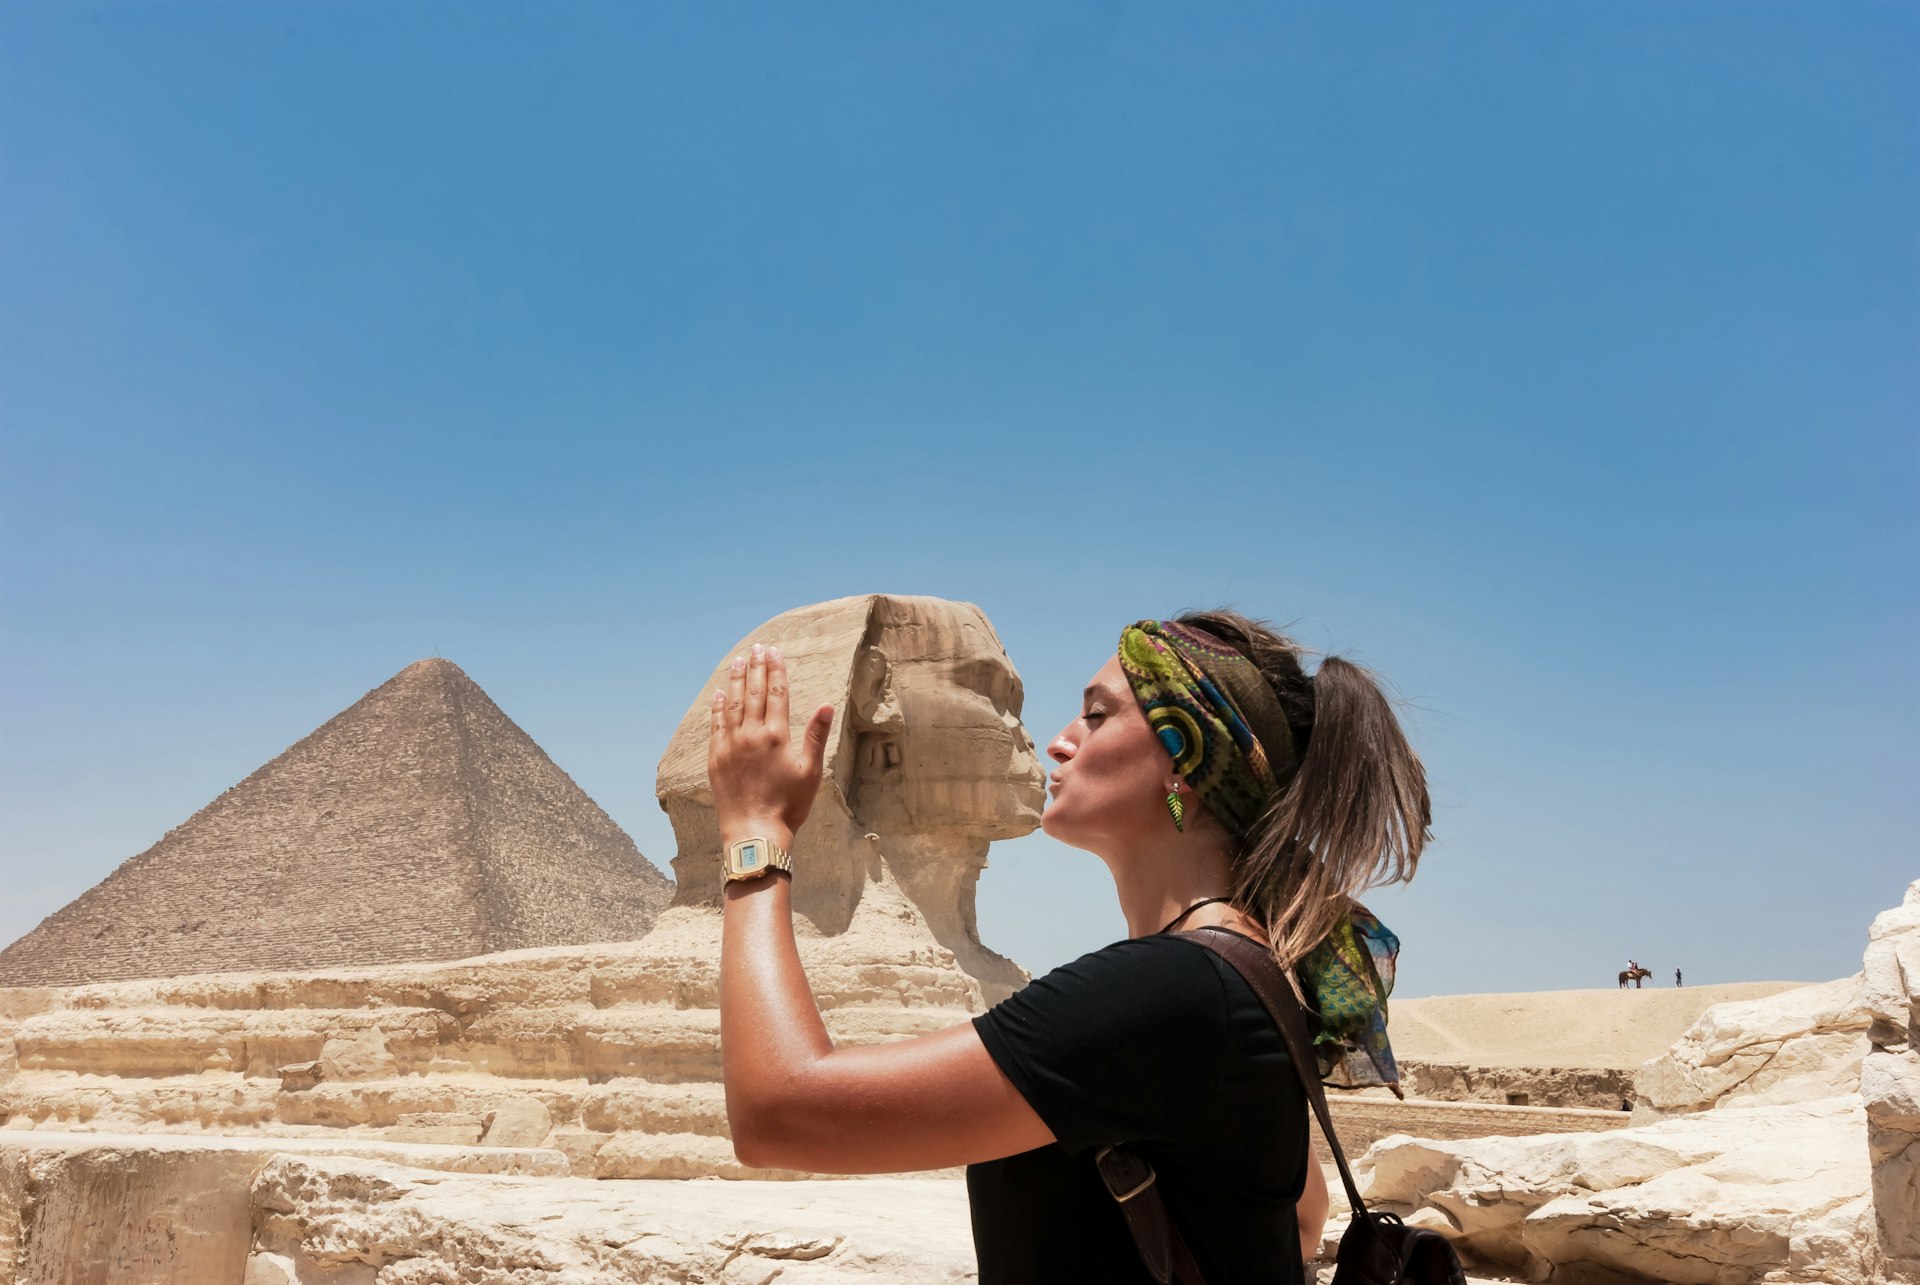 A woman pretends to kiss the Sphinx for a photograph based on a perspective trick